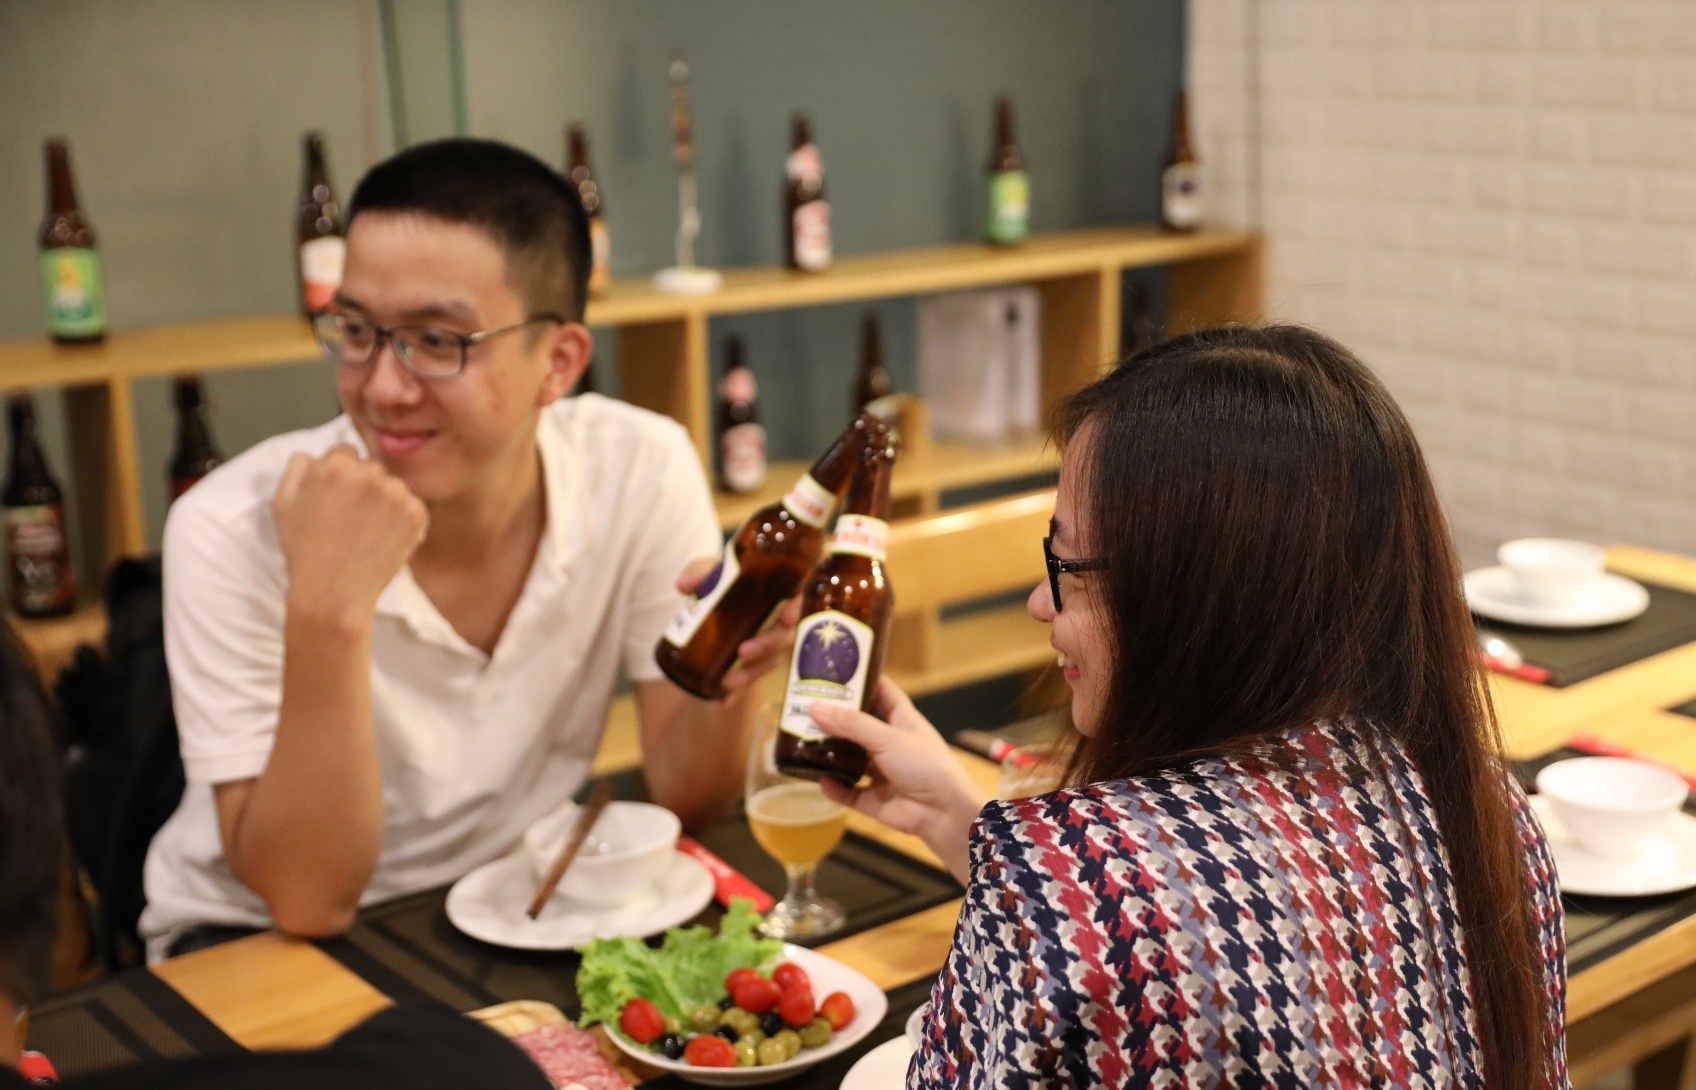 is non alcoholic beer now a priority at tet